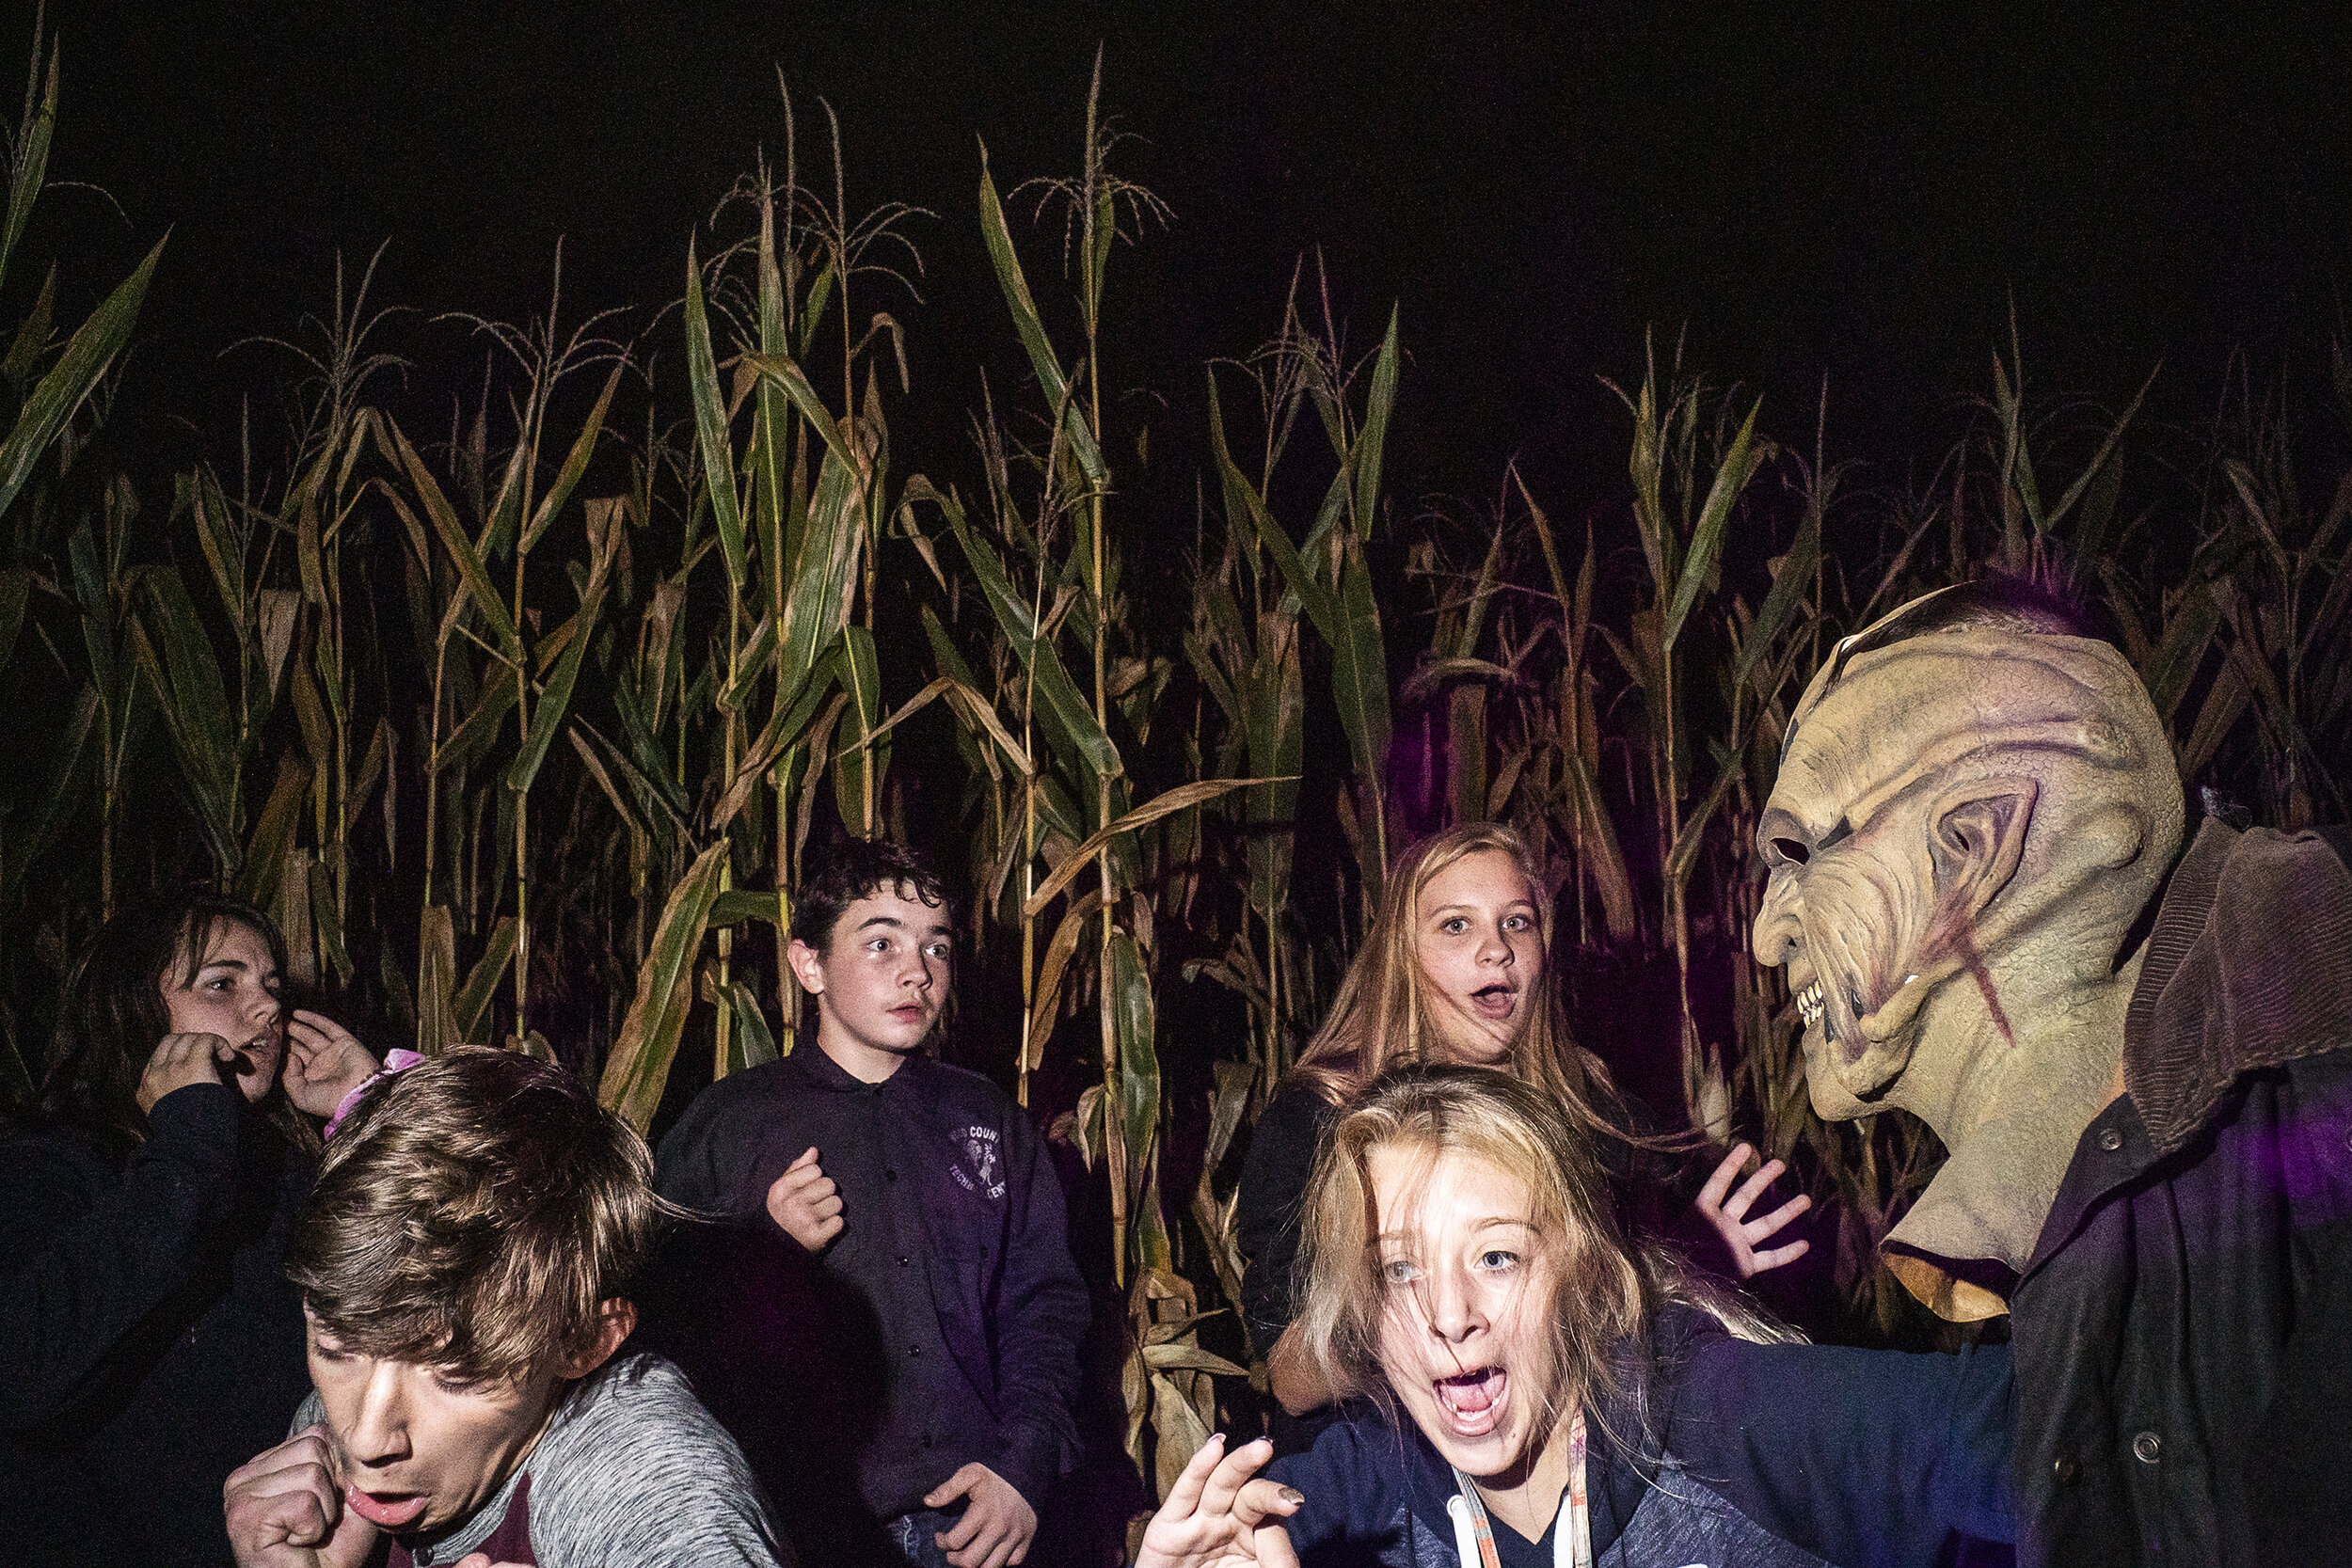  (Left to right) Janessa Ross, Eric Carson, Michael Rollyson, Brooklyn Camp and Eva Sheeter react to Field of Screams volunteer, Seth Coleman, jumping down from his scarecrow platform on Saturday, October 5, 2019. (James Year/Ohio University) 